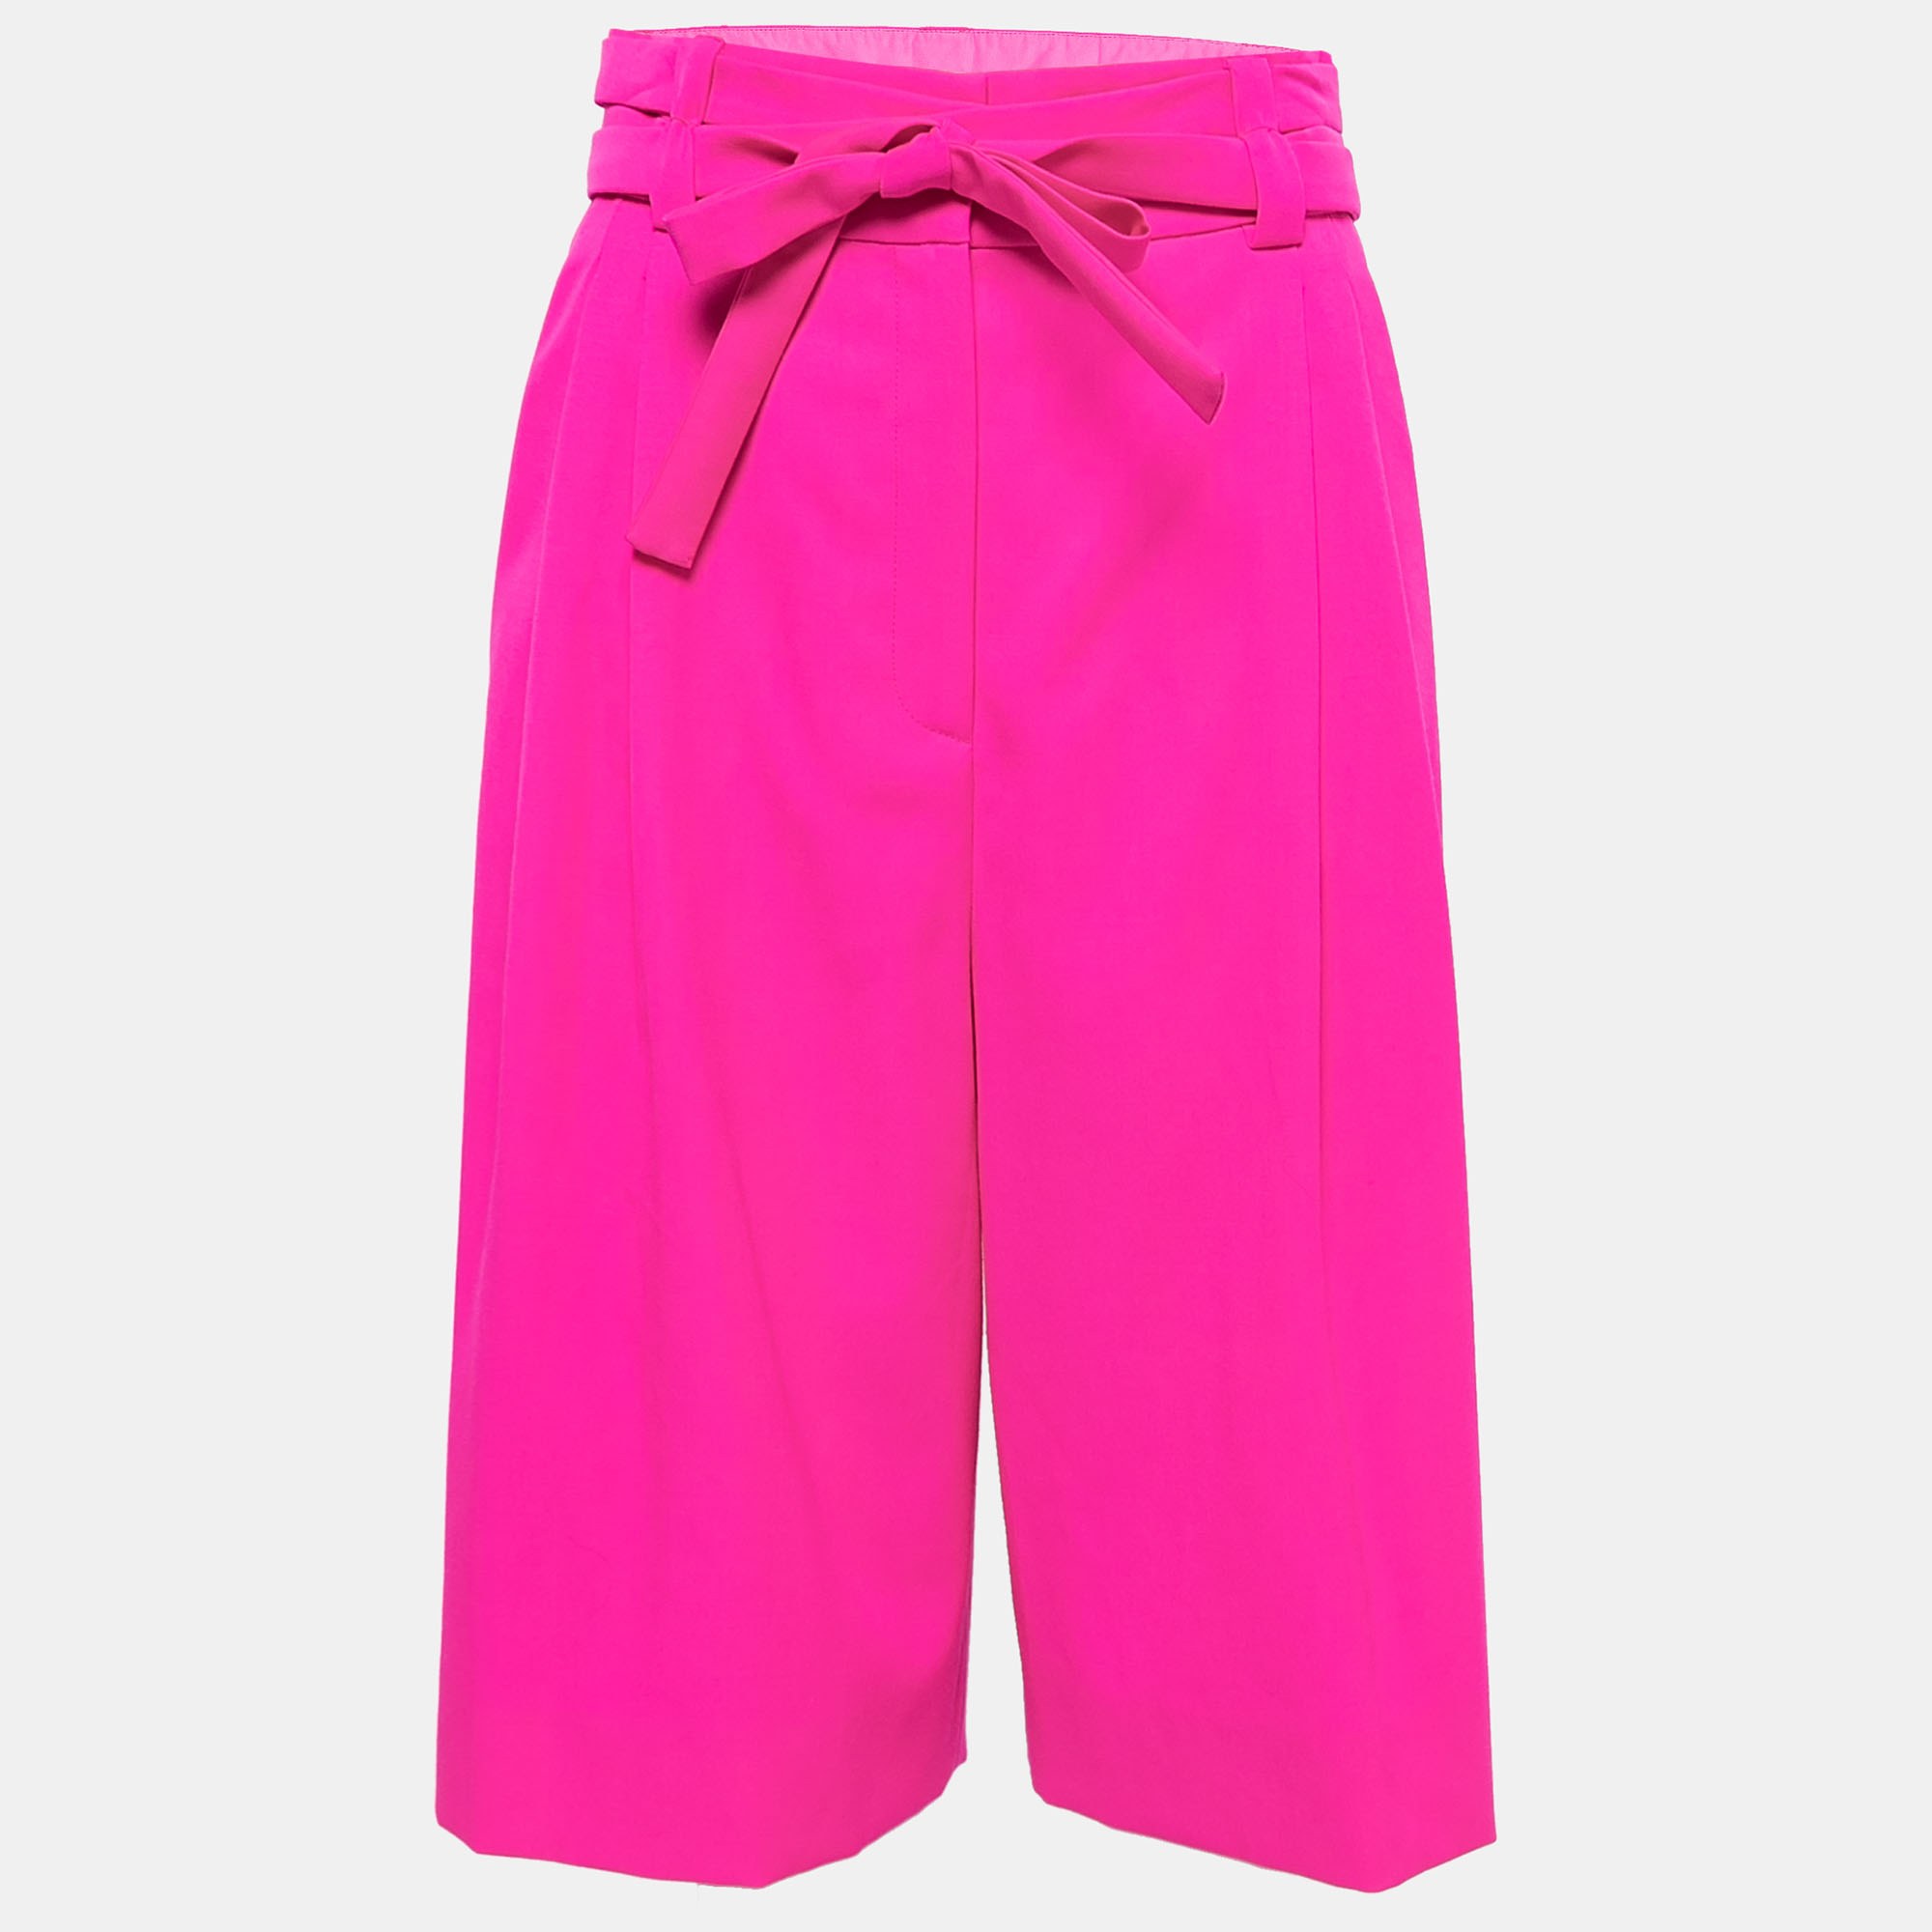 Valentino neon pink wool pleated knee-length shorts s